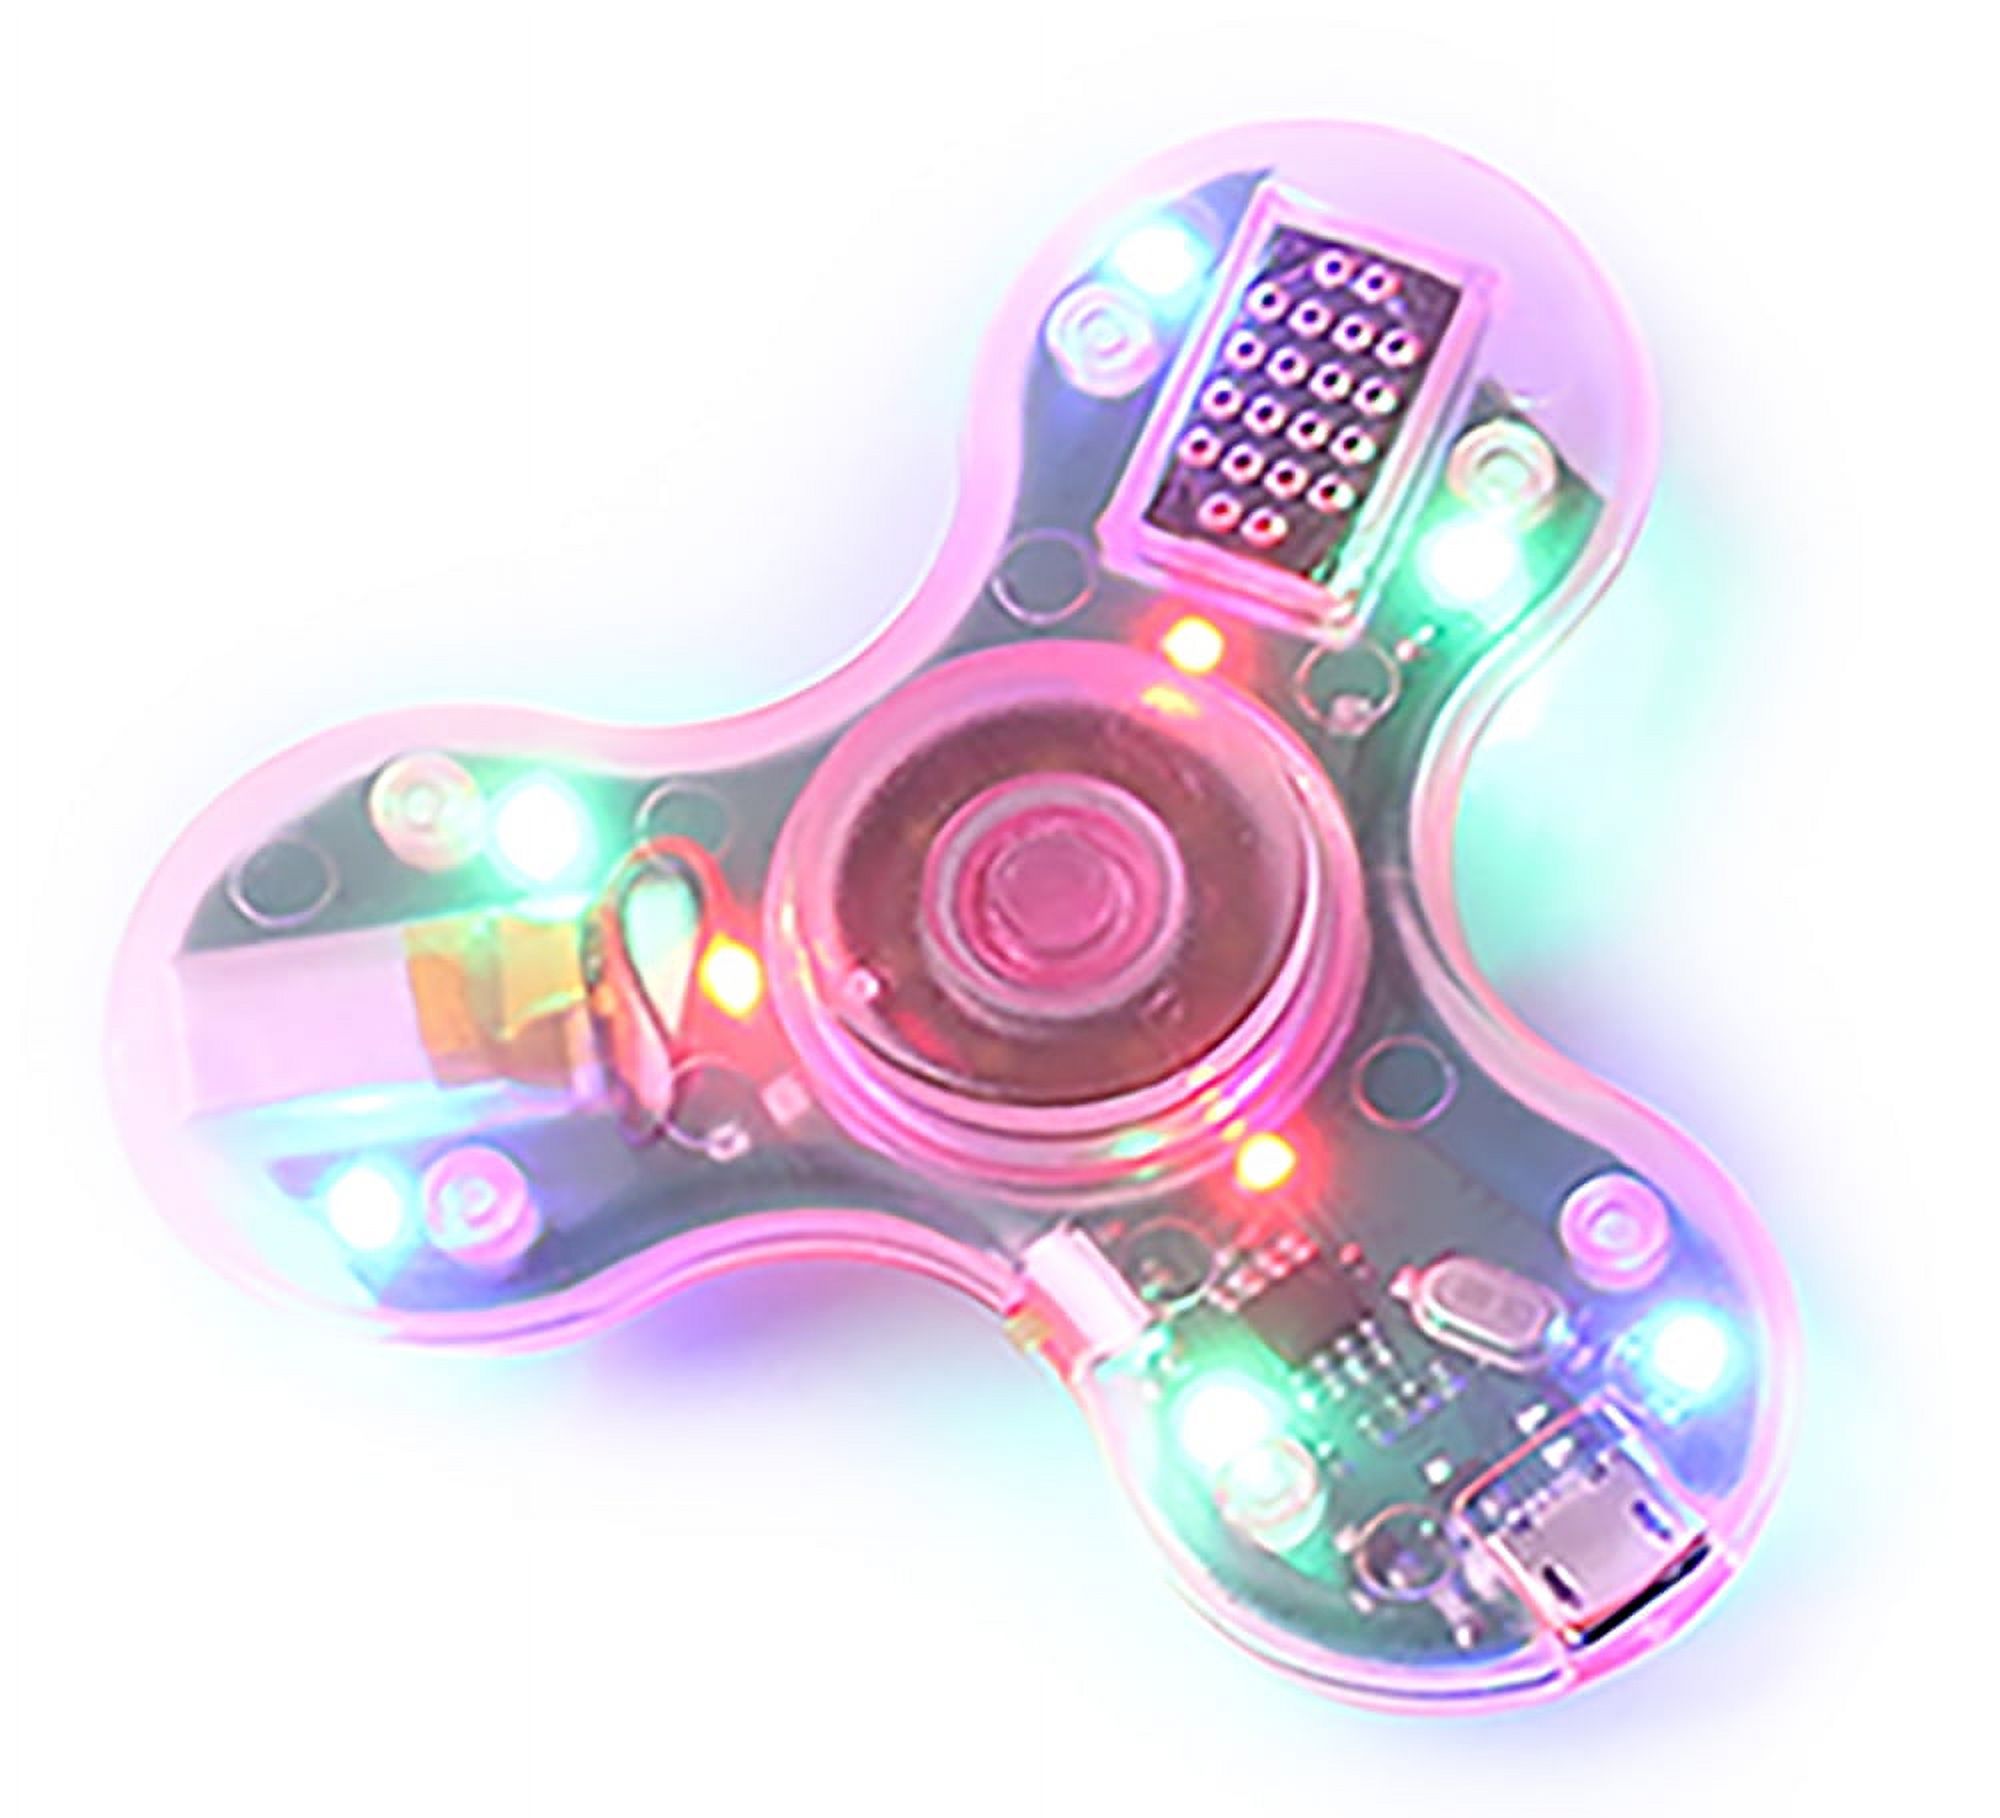 Transparent LED Spinners with Bluetooth Speaker - 2 Pack - image 2 of 4